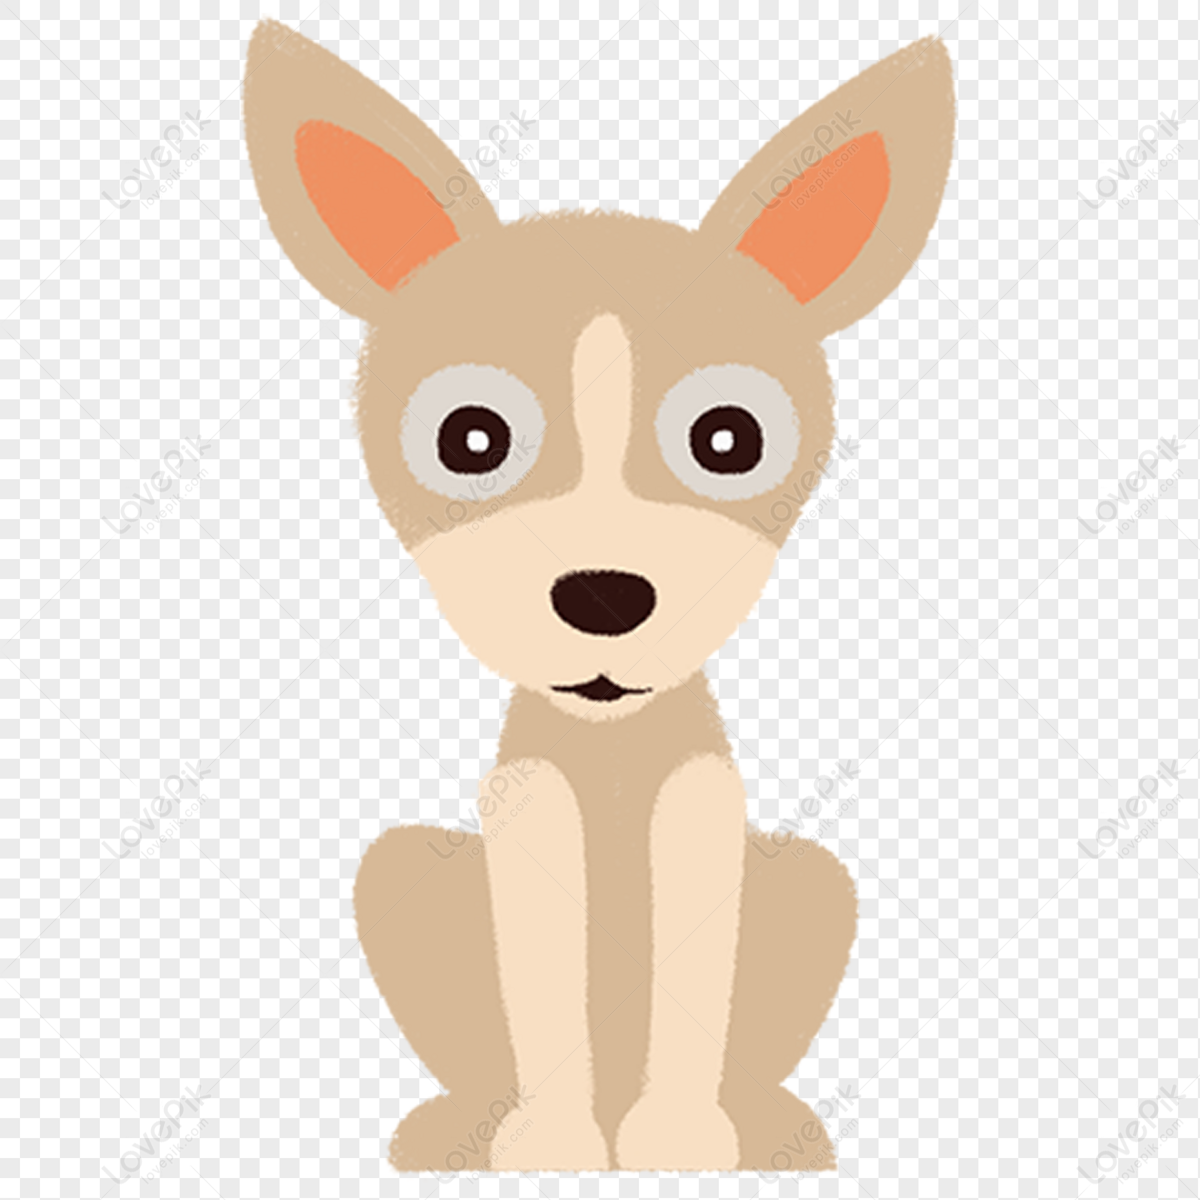 Big Ear Dog PNG Image Free Download And Clipart Image For Free Download -  Lovepik | 400230801